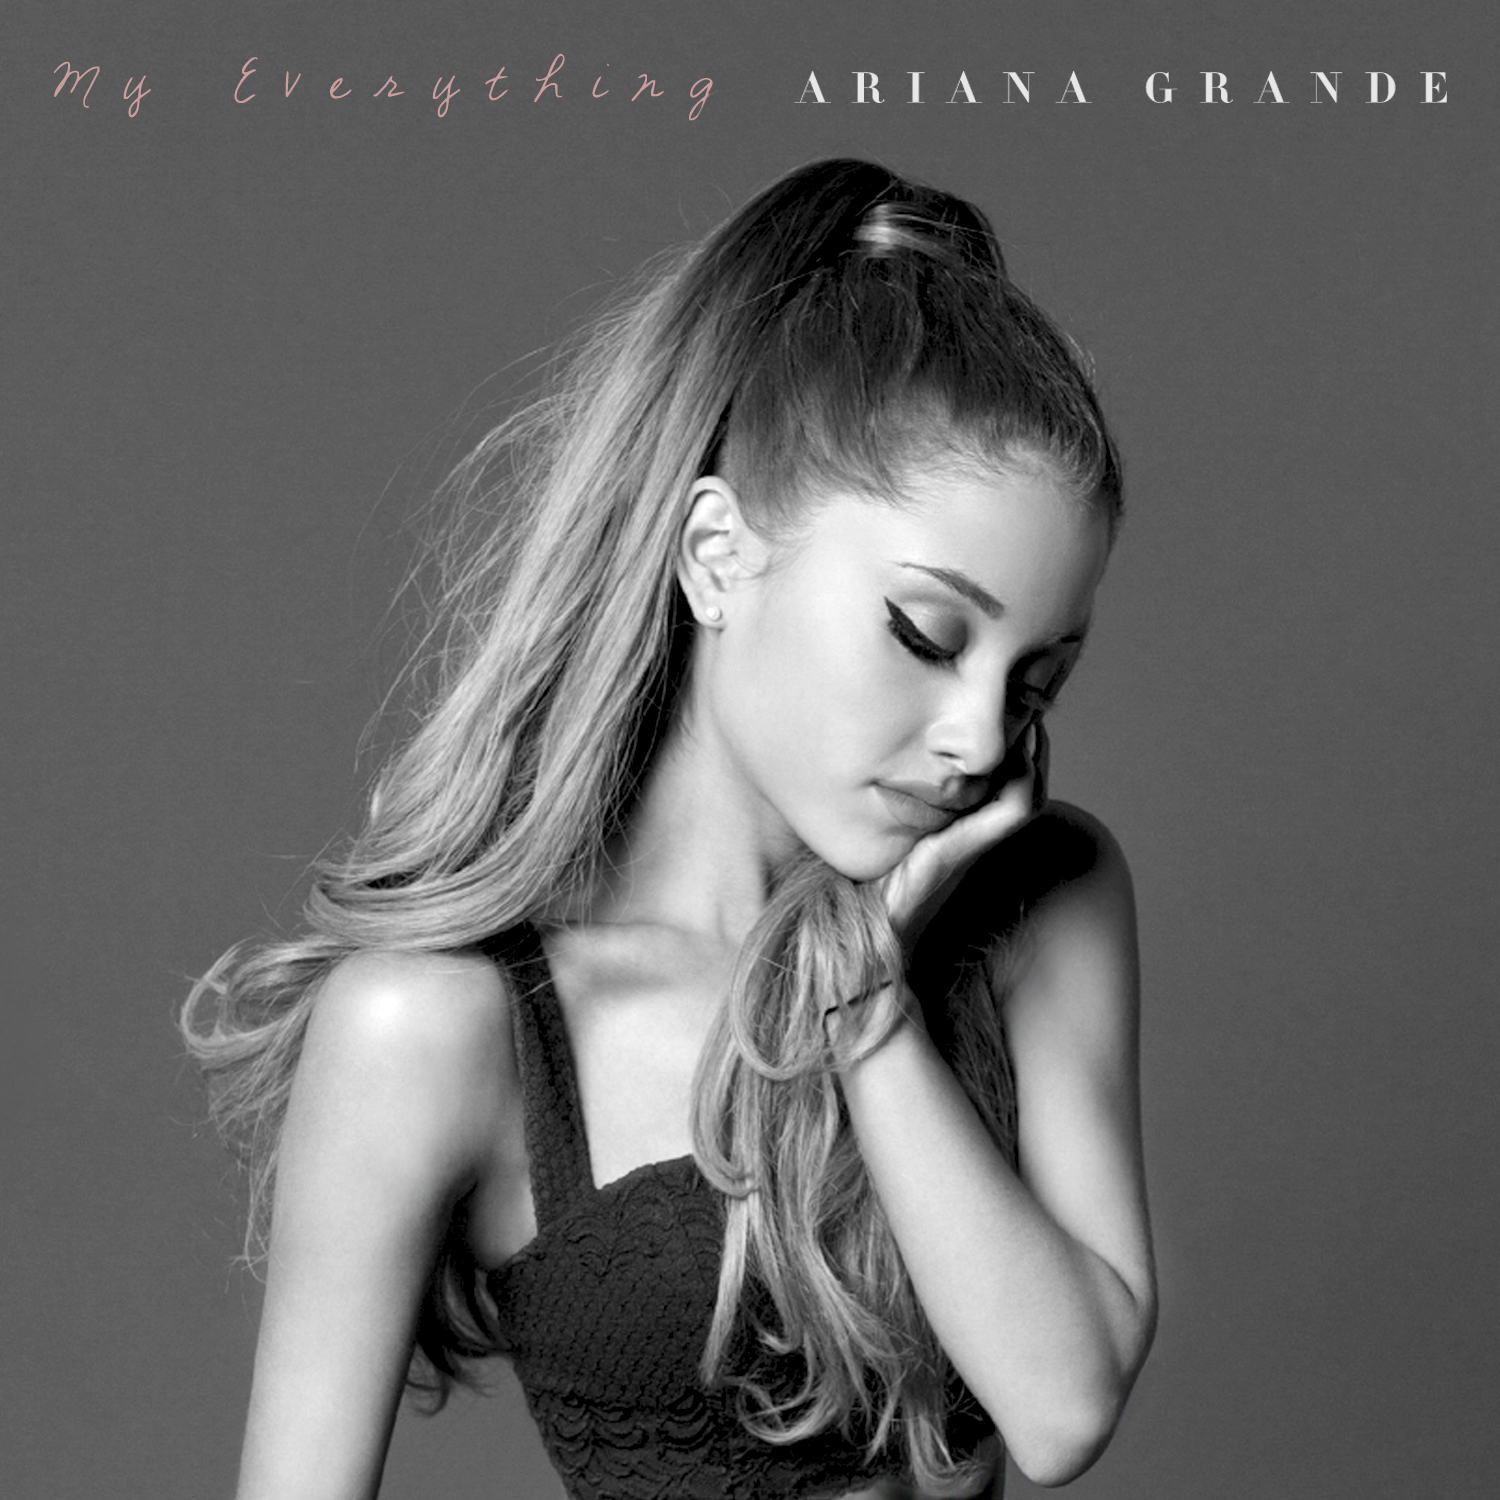 ariana grande he give it to me